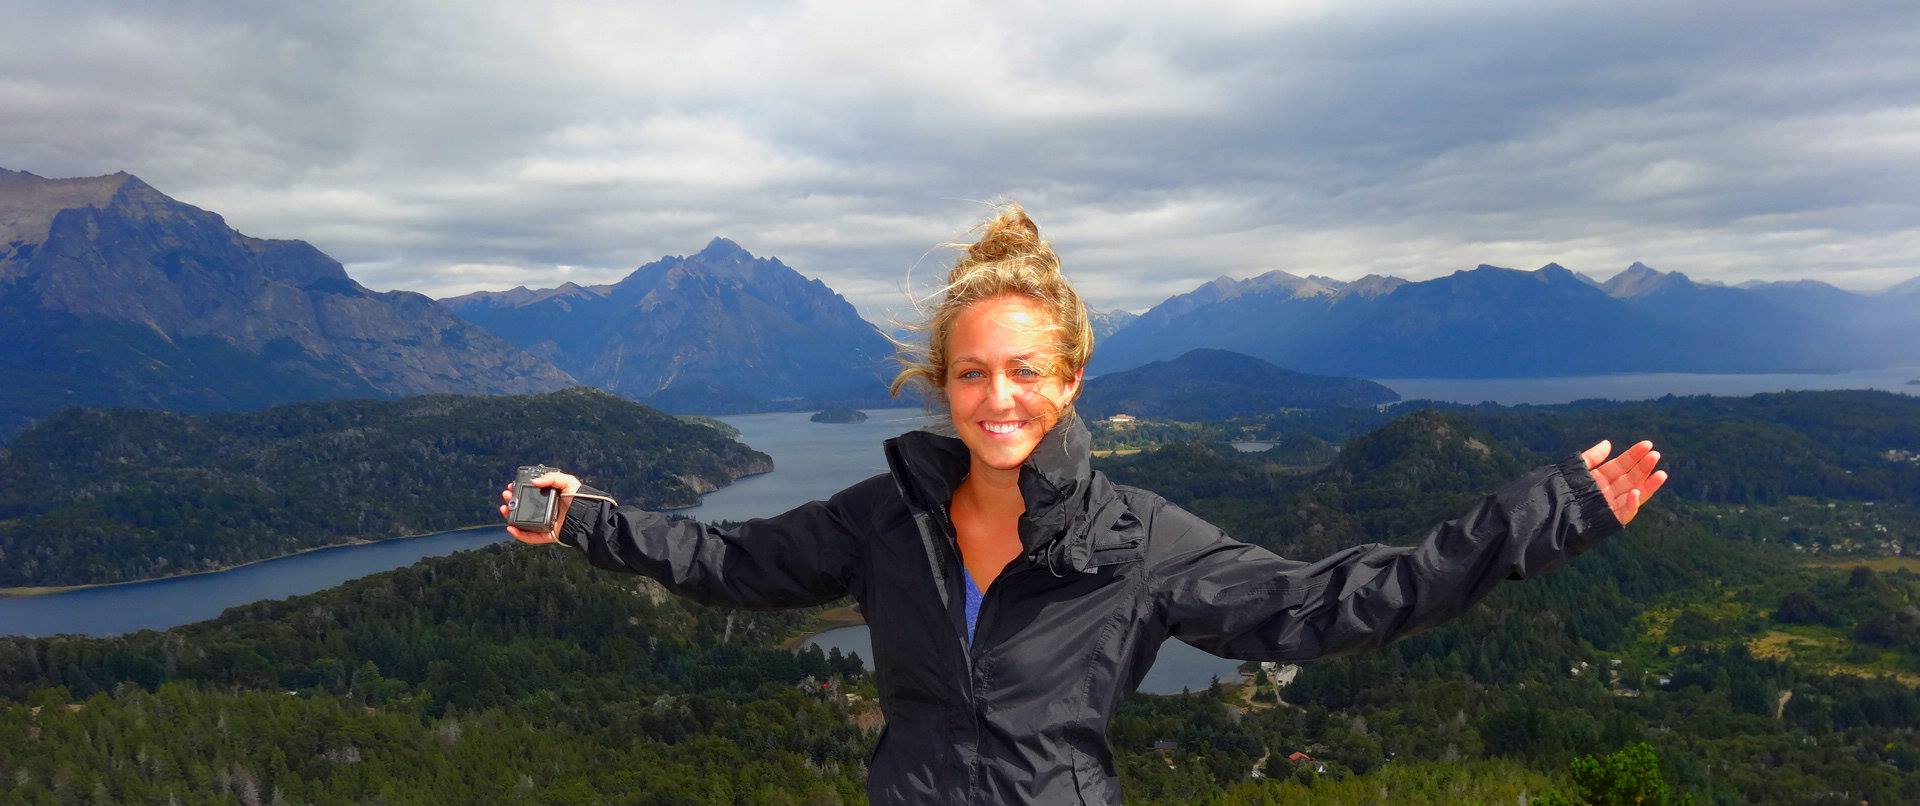 Zoeller ('16) spent semester in Argentina studying, working